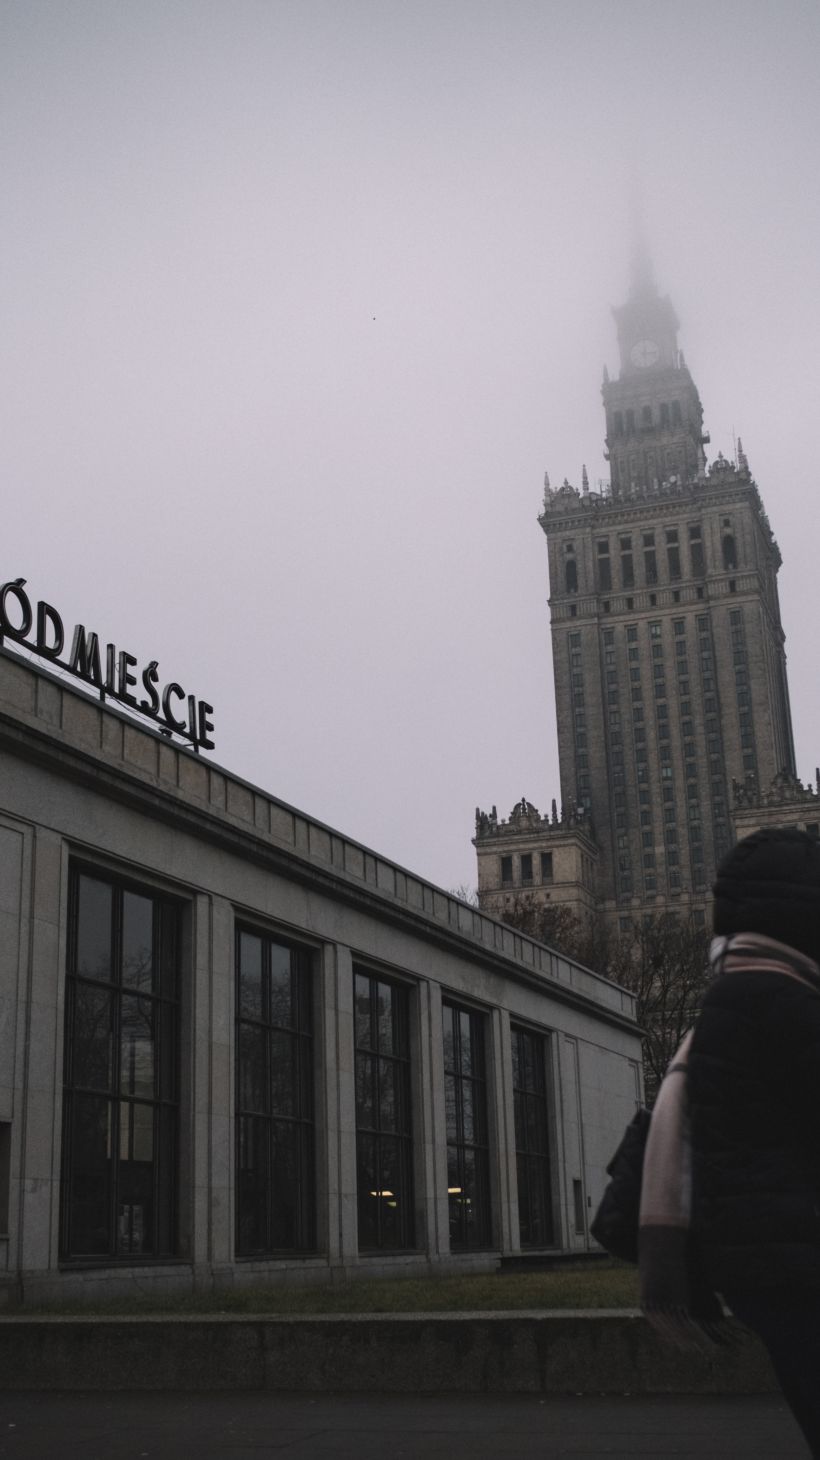 A young woman walks near by the Palace of Culture and Sciences in downtown Warsaw